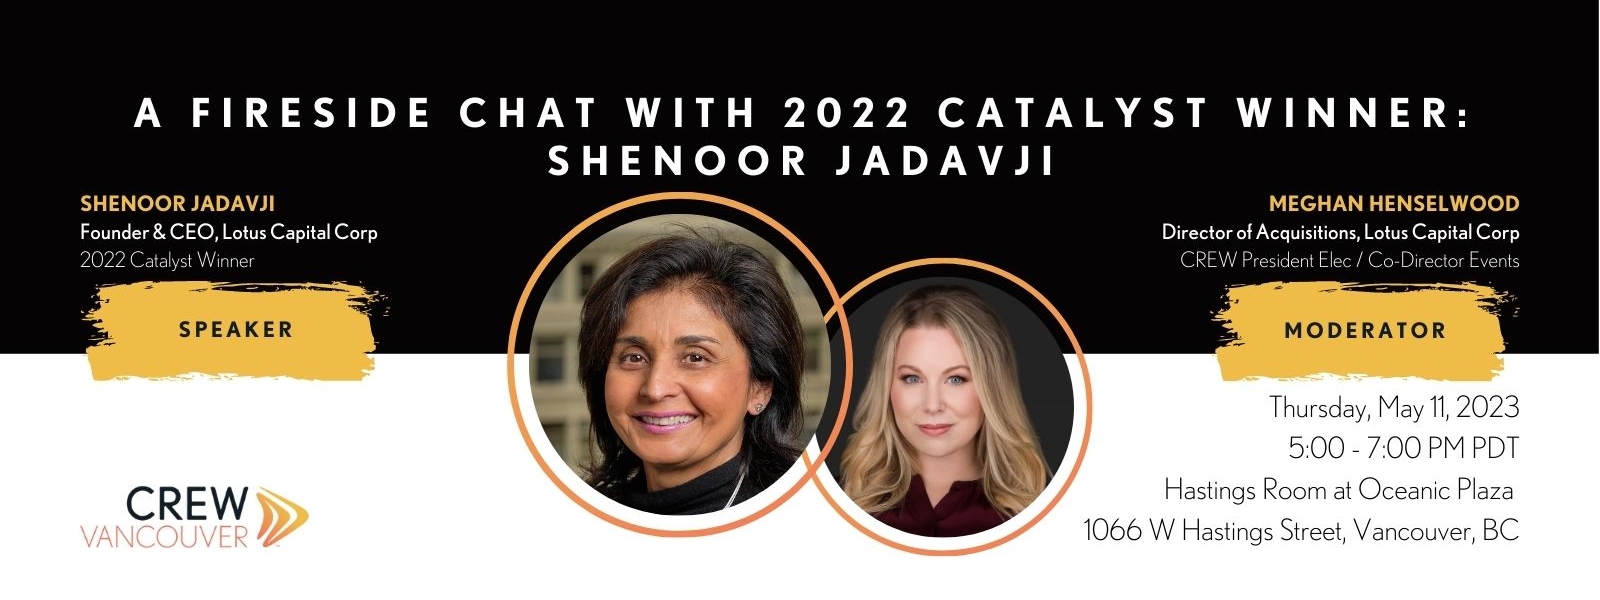 CREW Vancouver Event A Fireside Chat with 2022 Catalyst Winner Shenoor Jadavji V3 2023 05 11 W